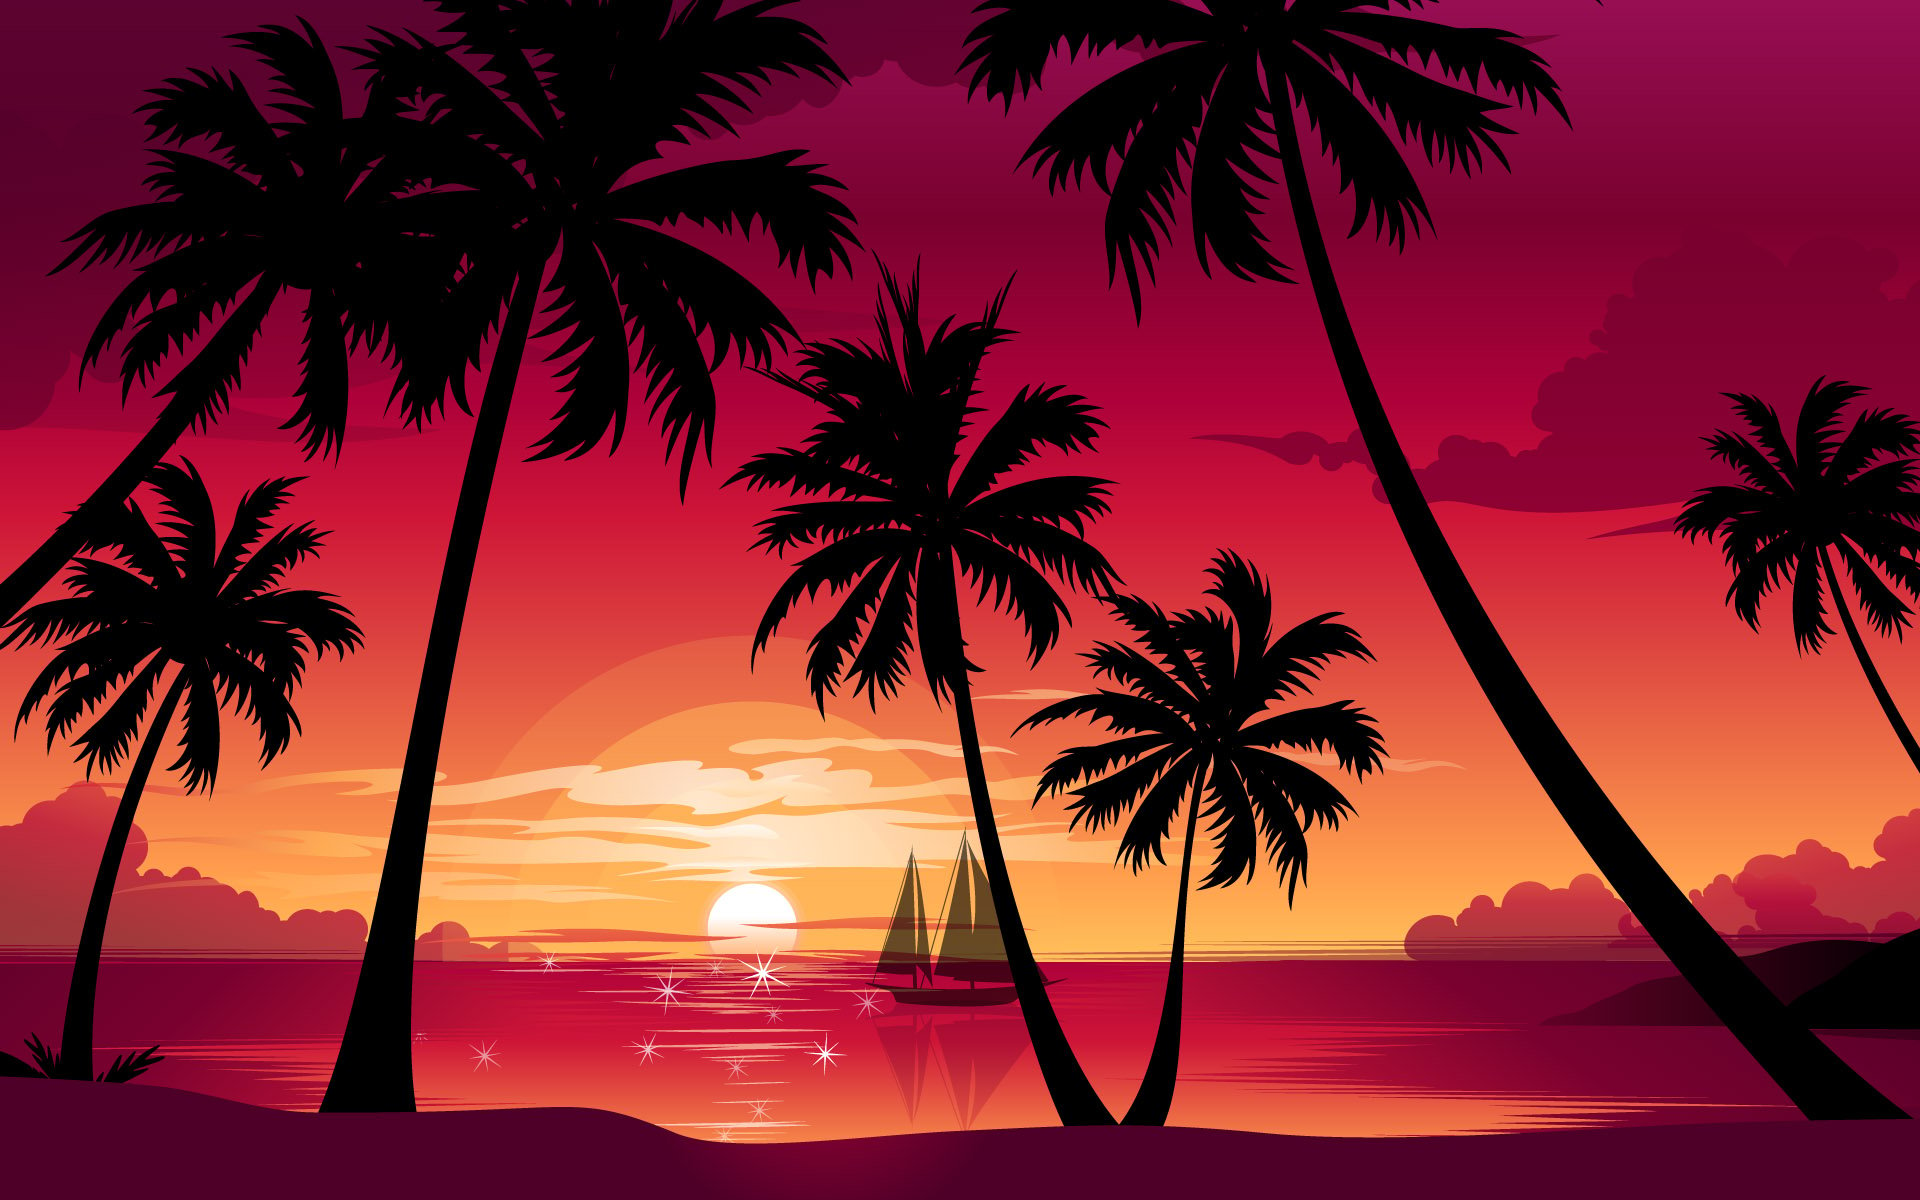 trees sunset hd wallpapers palm trees sunset wallpapers palm trees